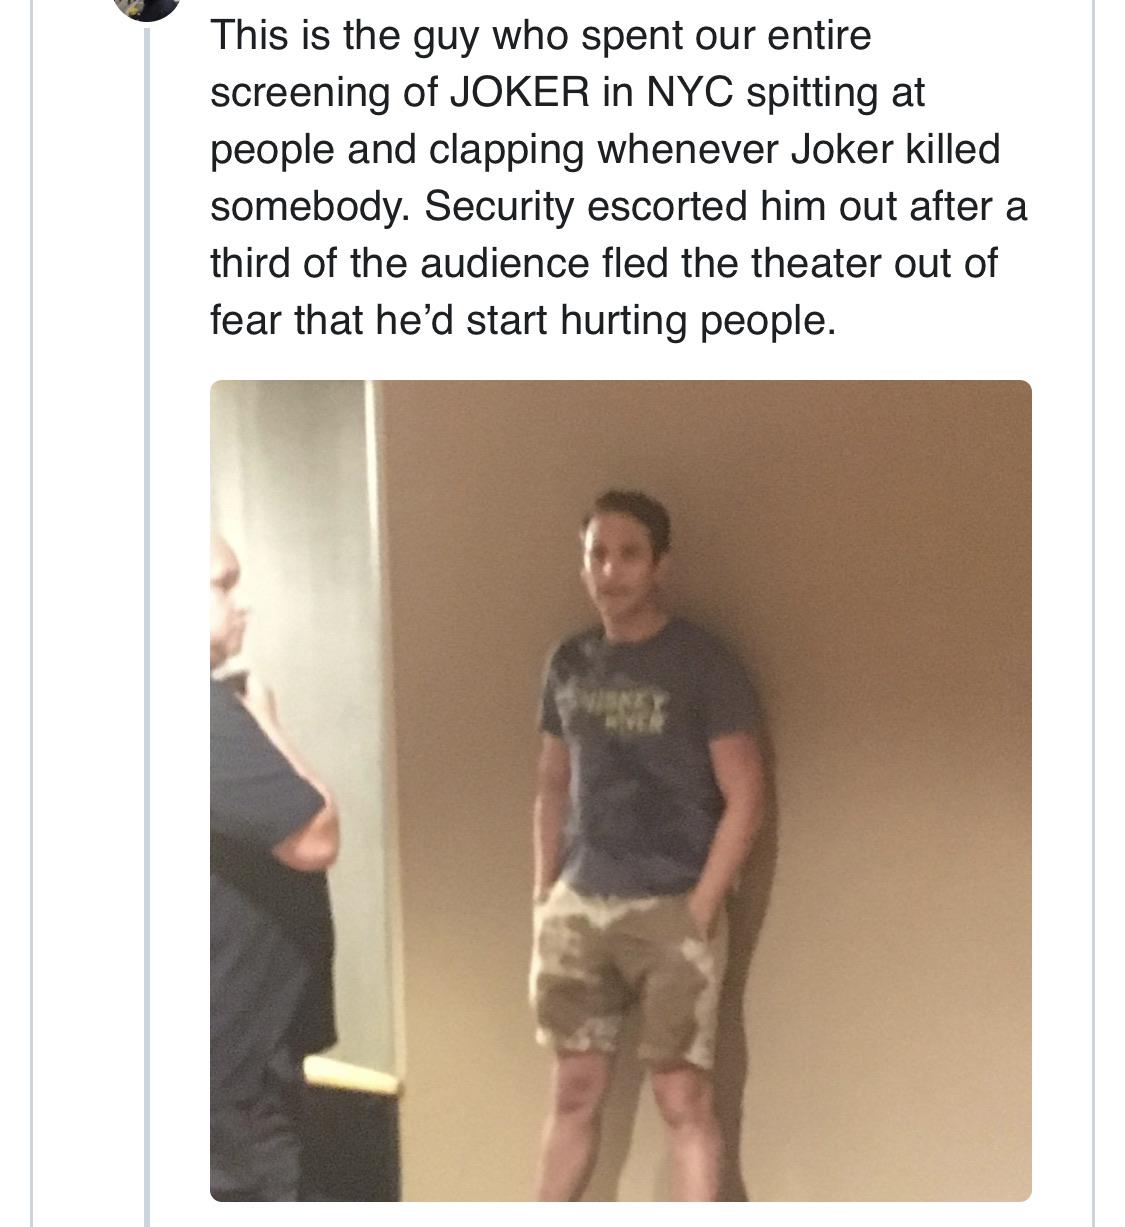 times square joker - This is the guy who spent our entire screening of Joker in Nyc spitting at people and clapping whenever Joker killed somebody. Security escorted him out after a third of the audience fled the theater out of fear that he'd start hurtin